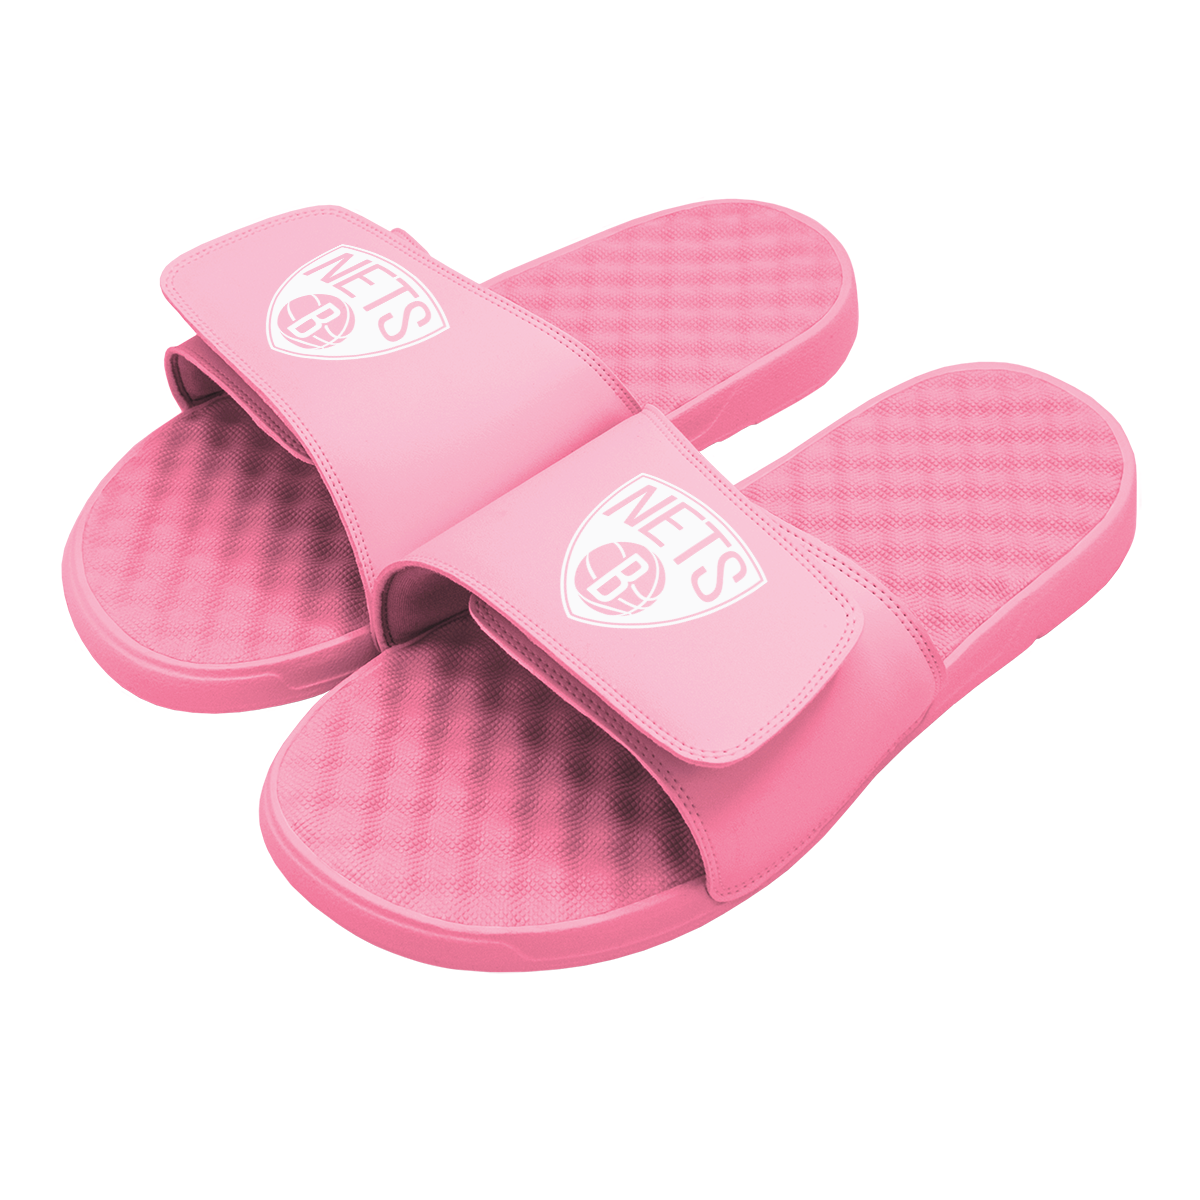 Brooklyn Nets Primary Pink Slides